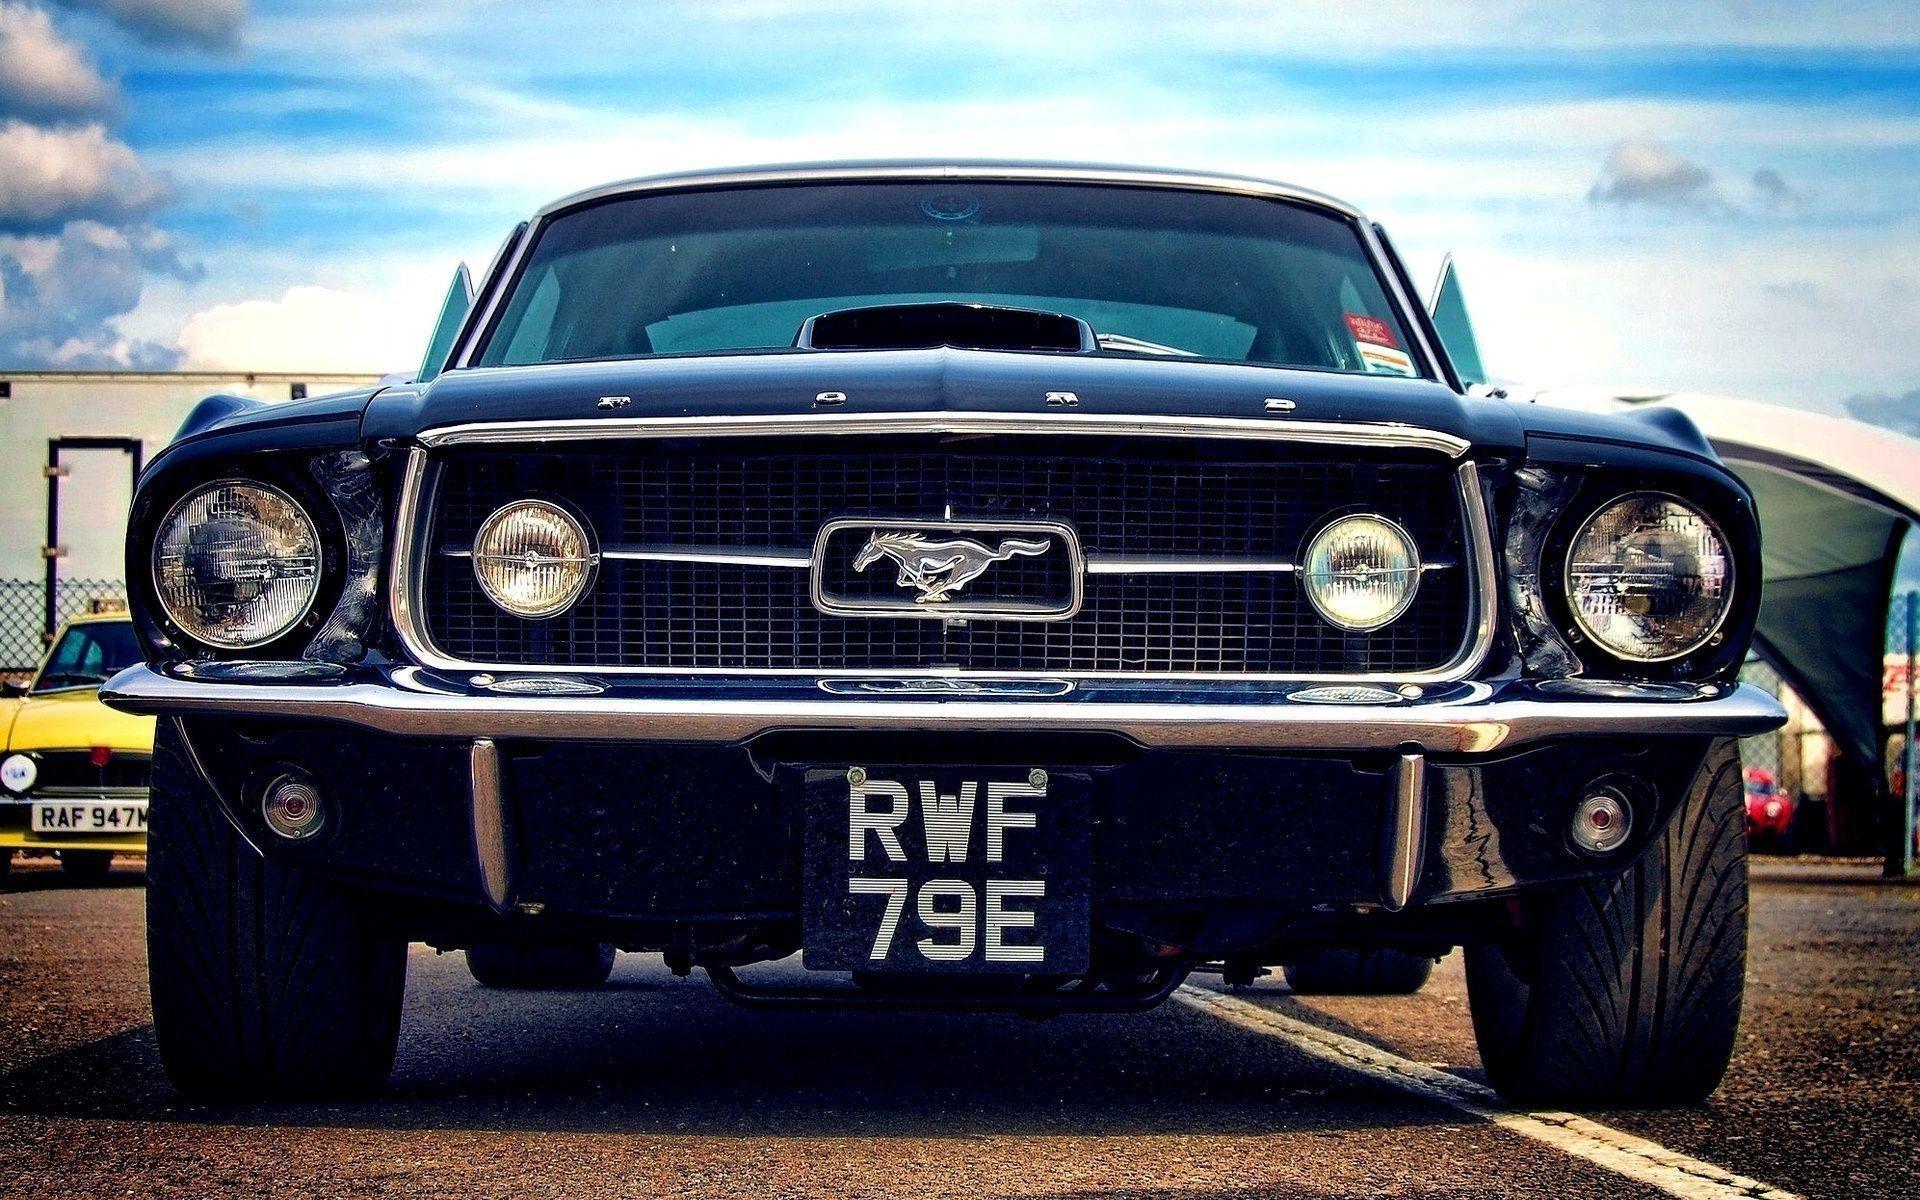 Ford Mustang Vintage Hd Wallpapers Wallpaper Cave